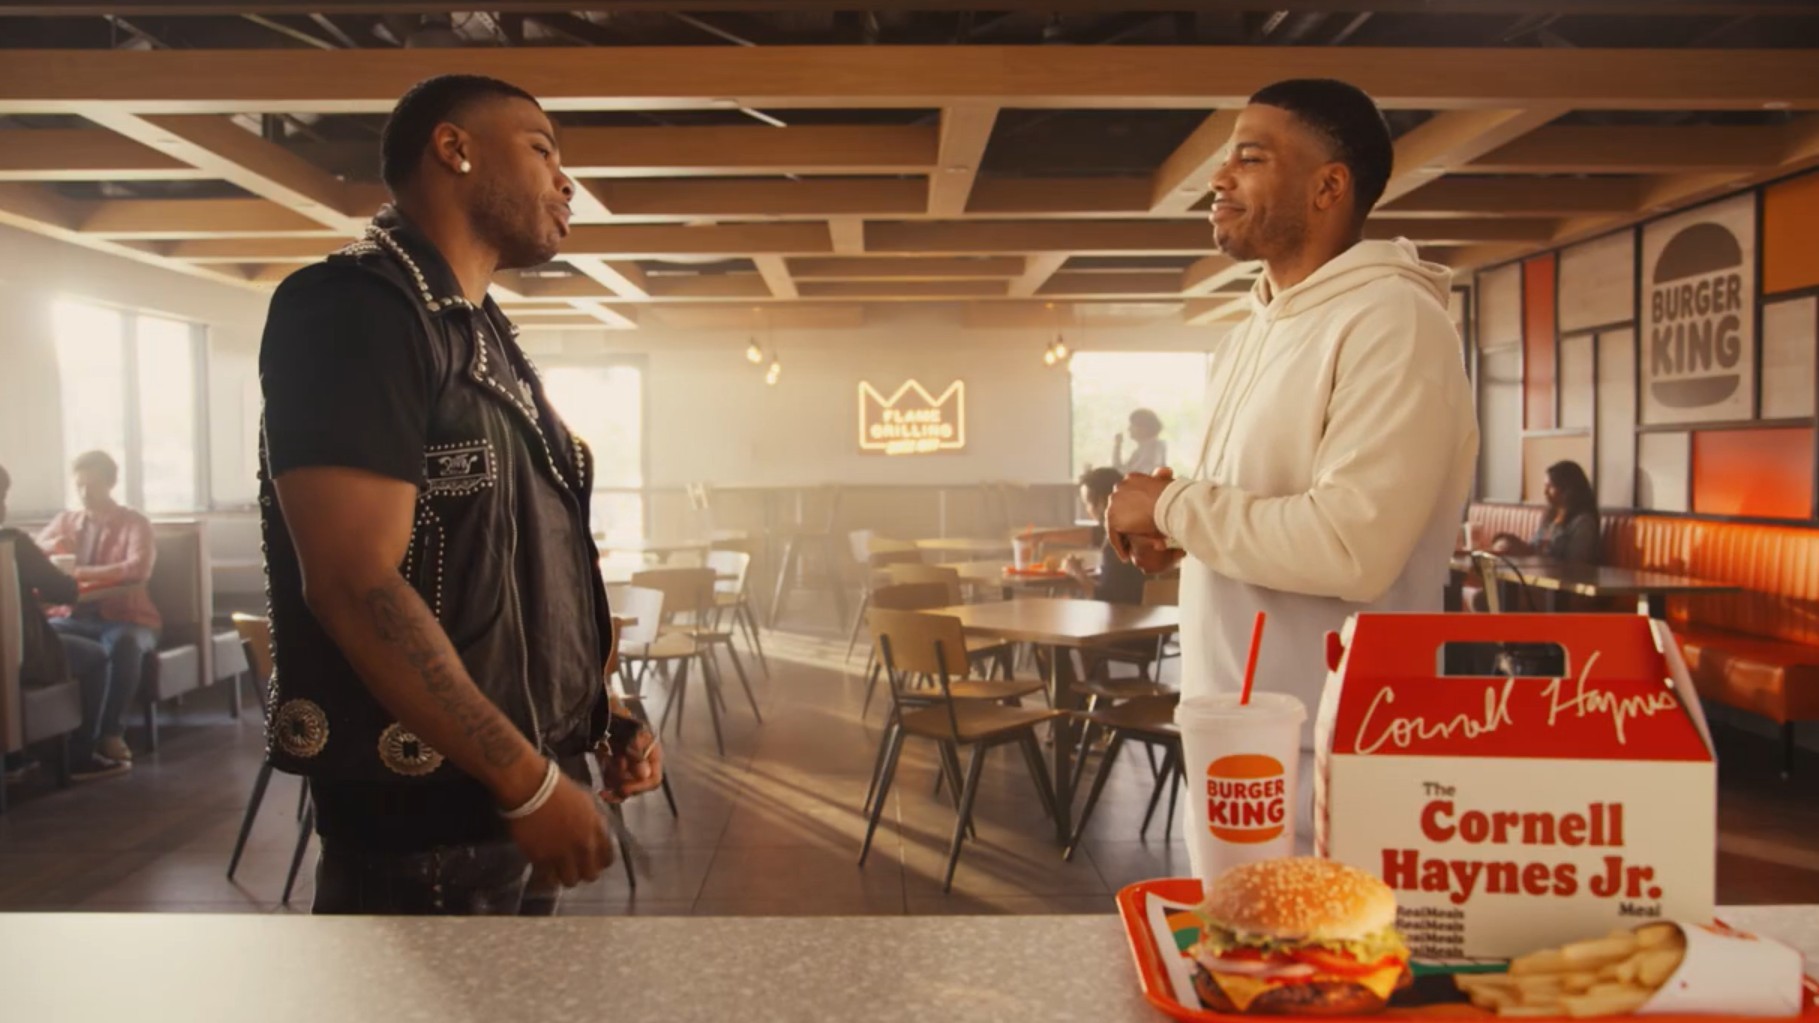 VIDEO: Nelly Keeps it Real With a New Burger King Meal | Food Blog